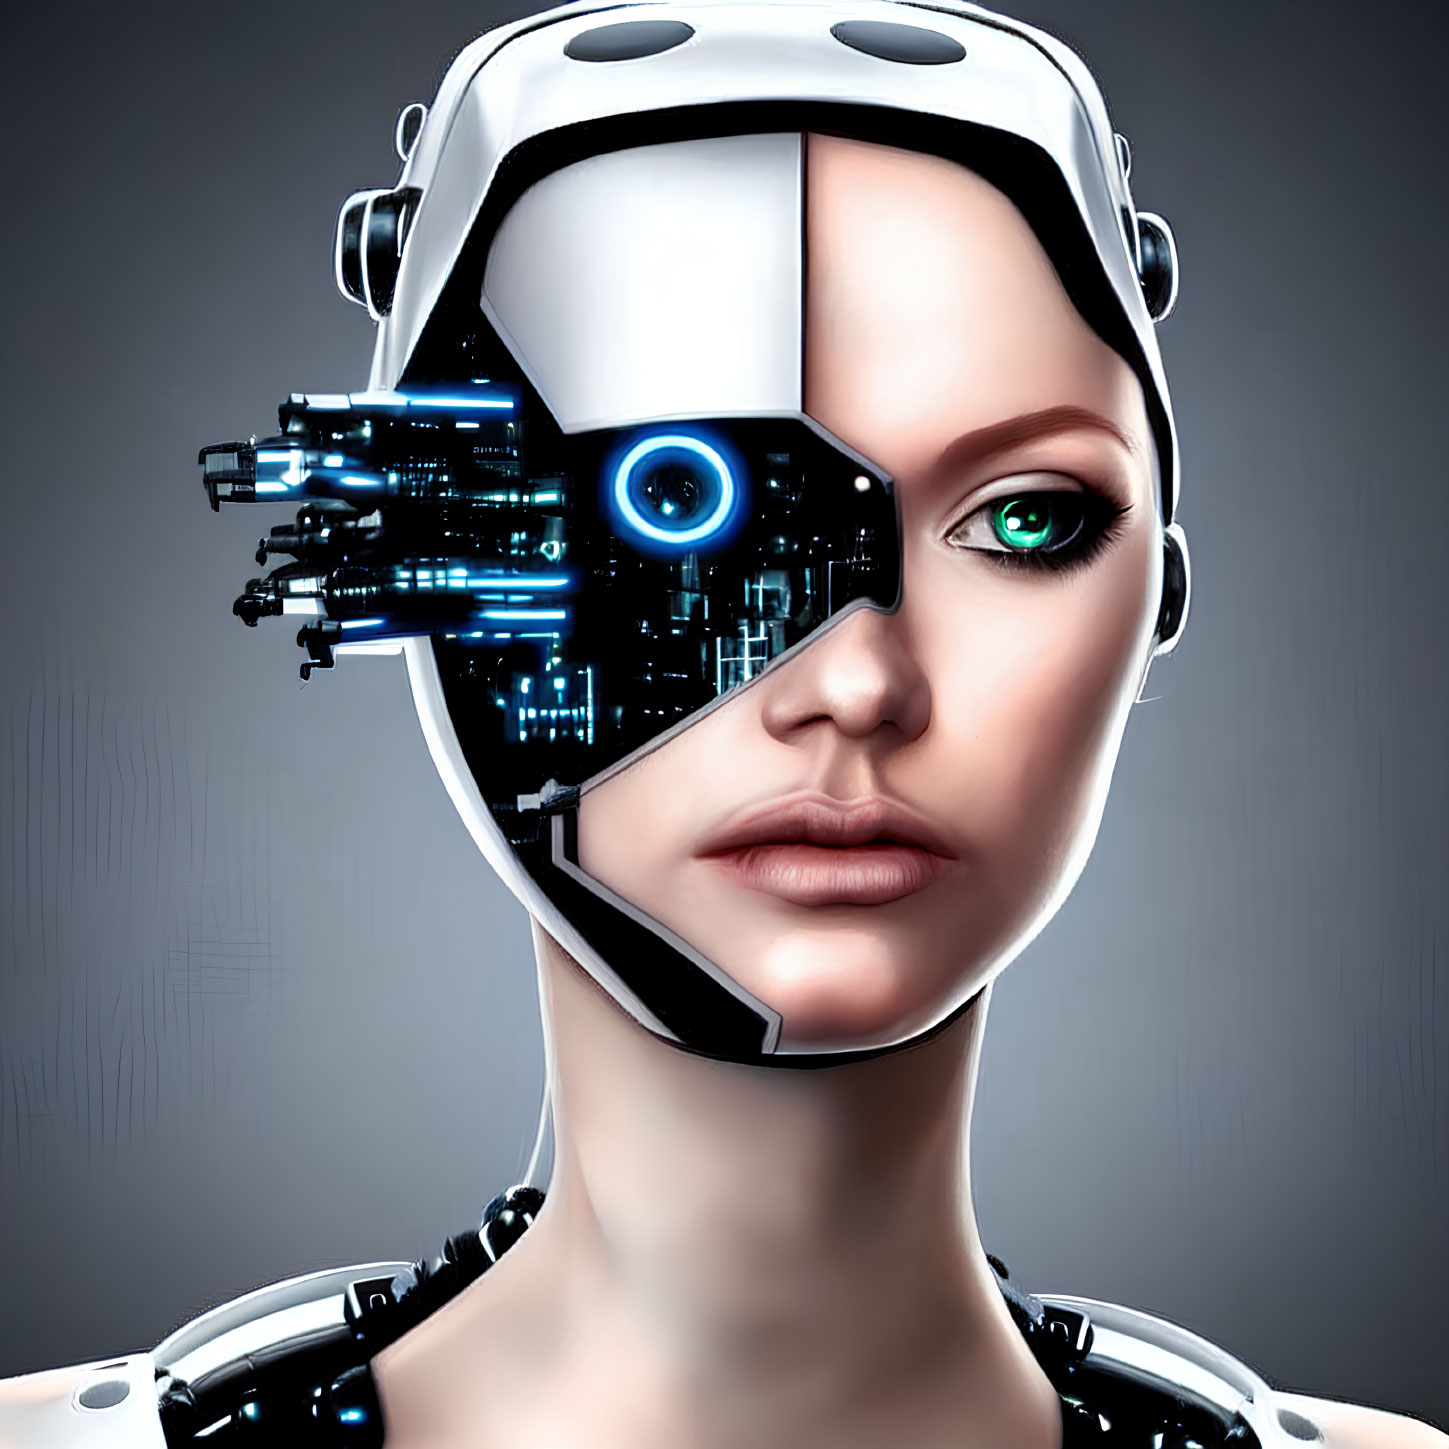 Female humanoid robot with cybernetic half-face and glowing blue eye.